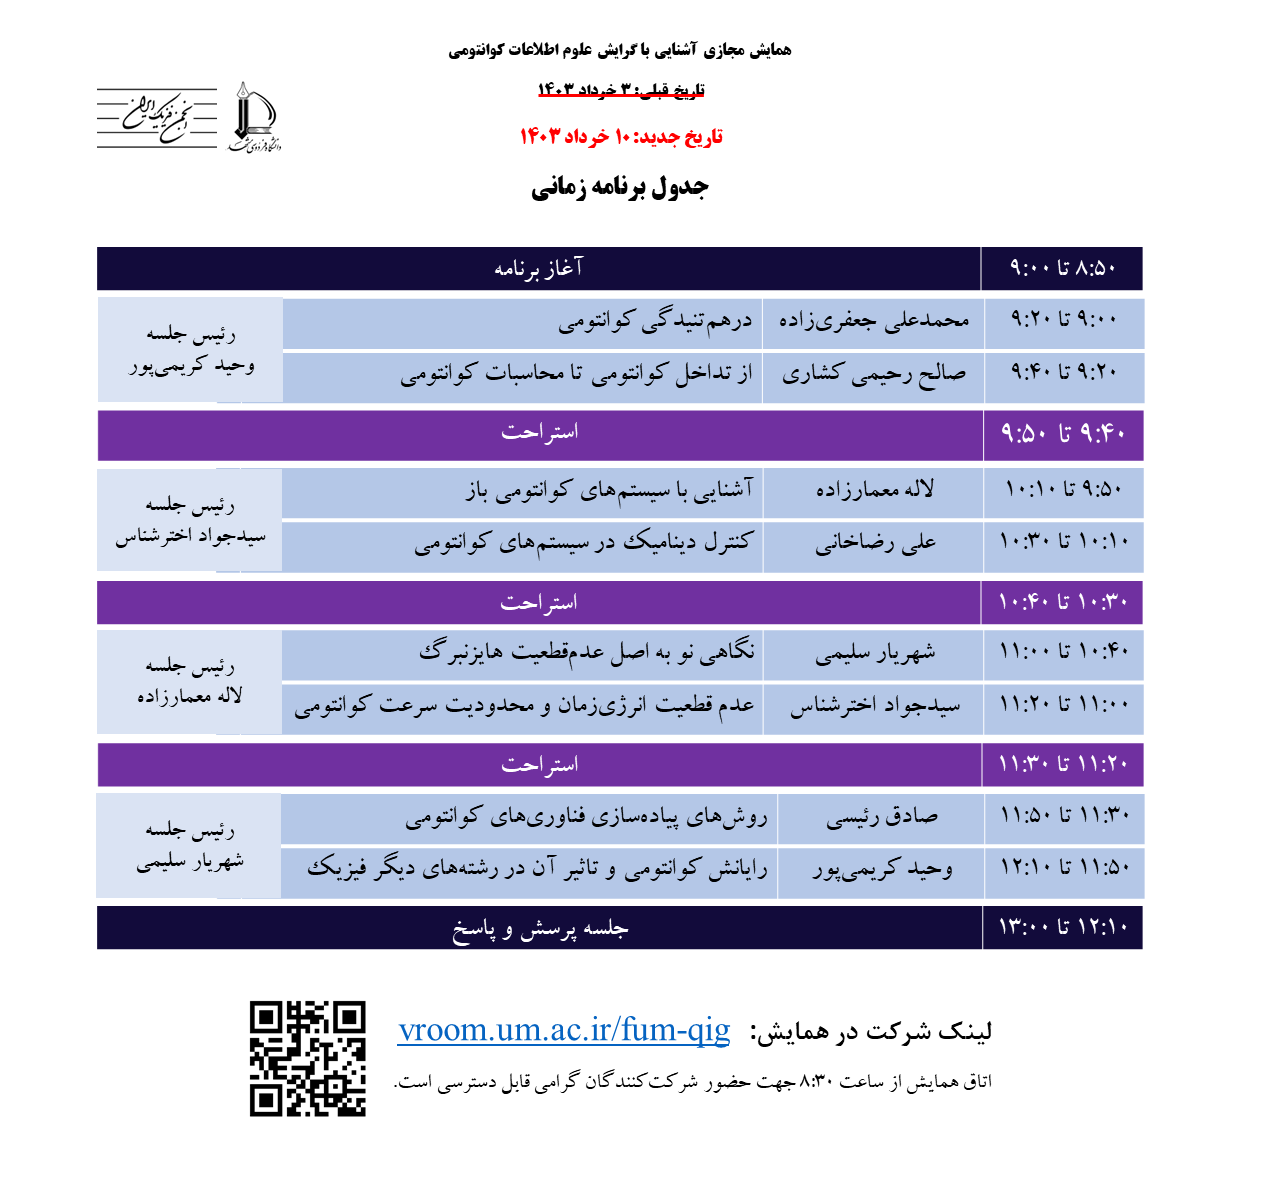 TimeTable_-_1403-03-10.png